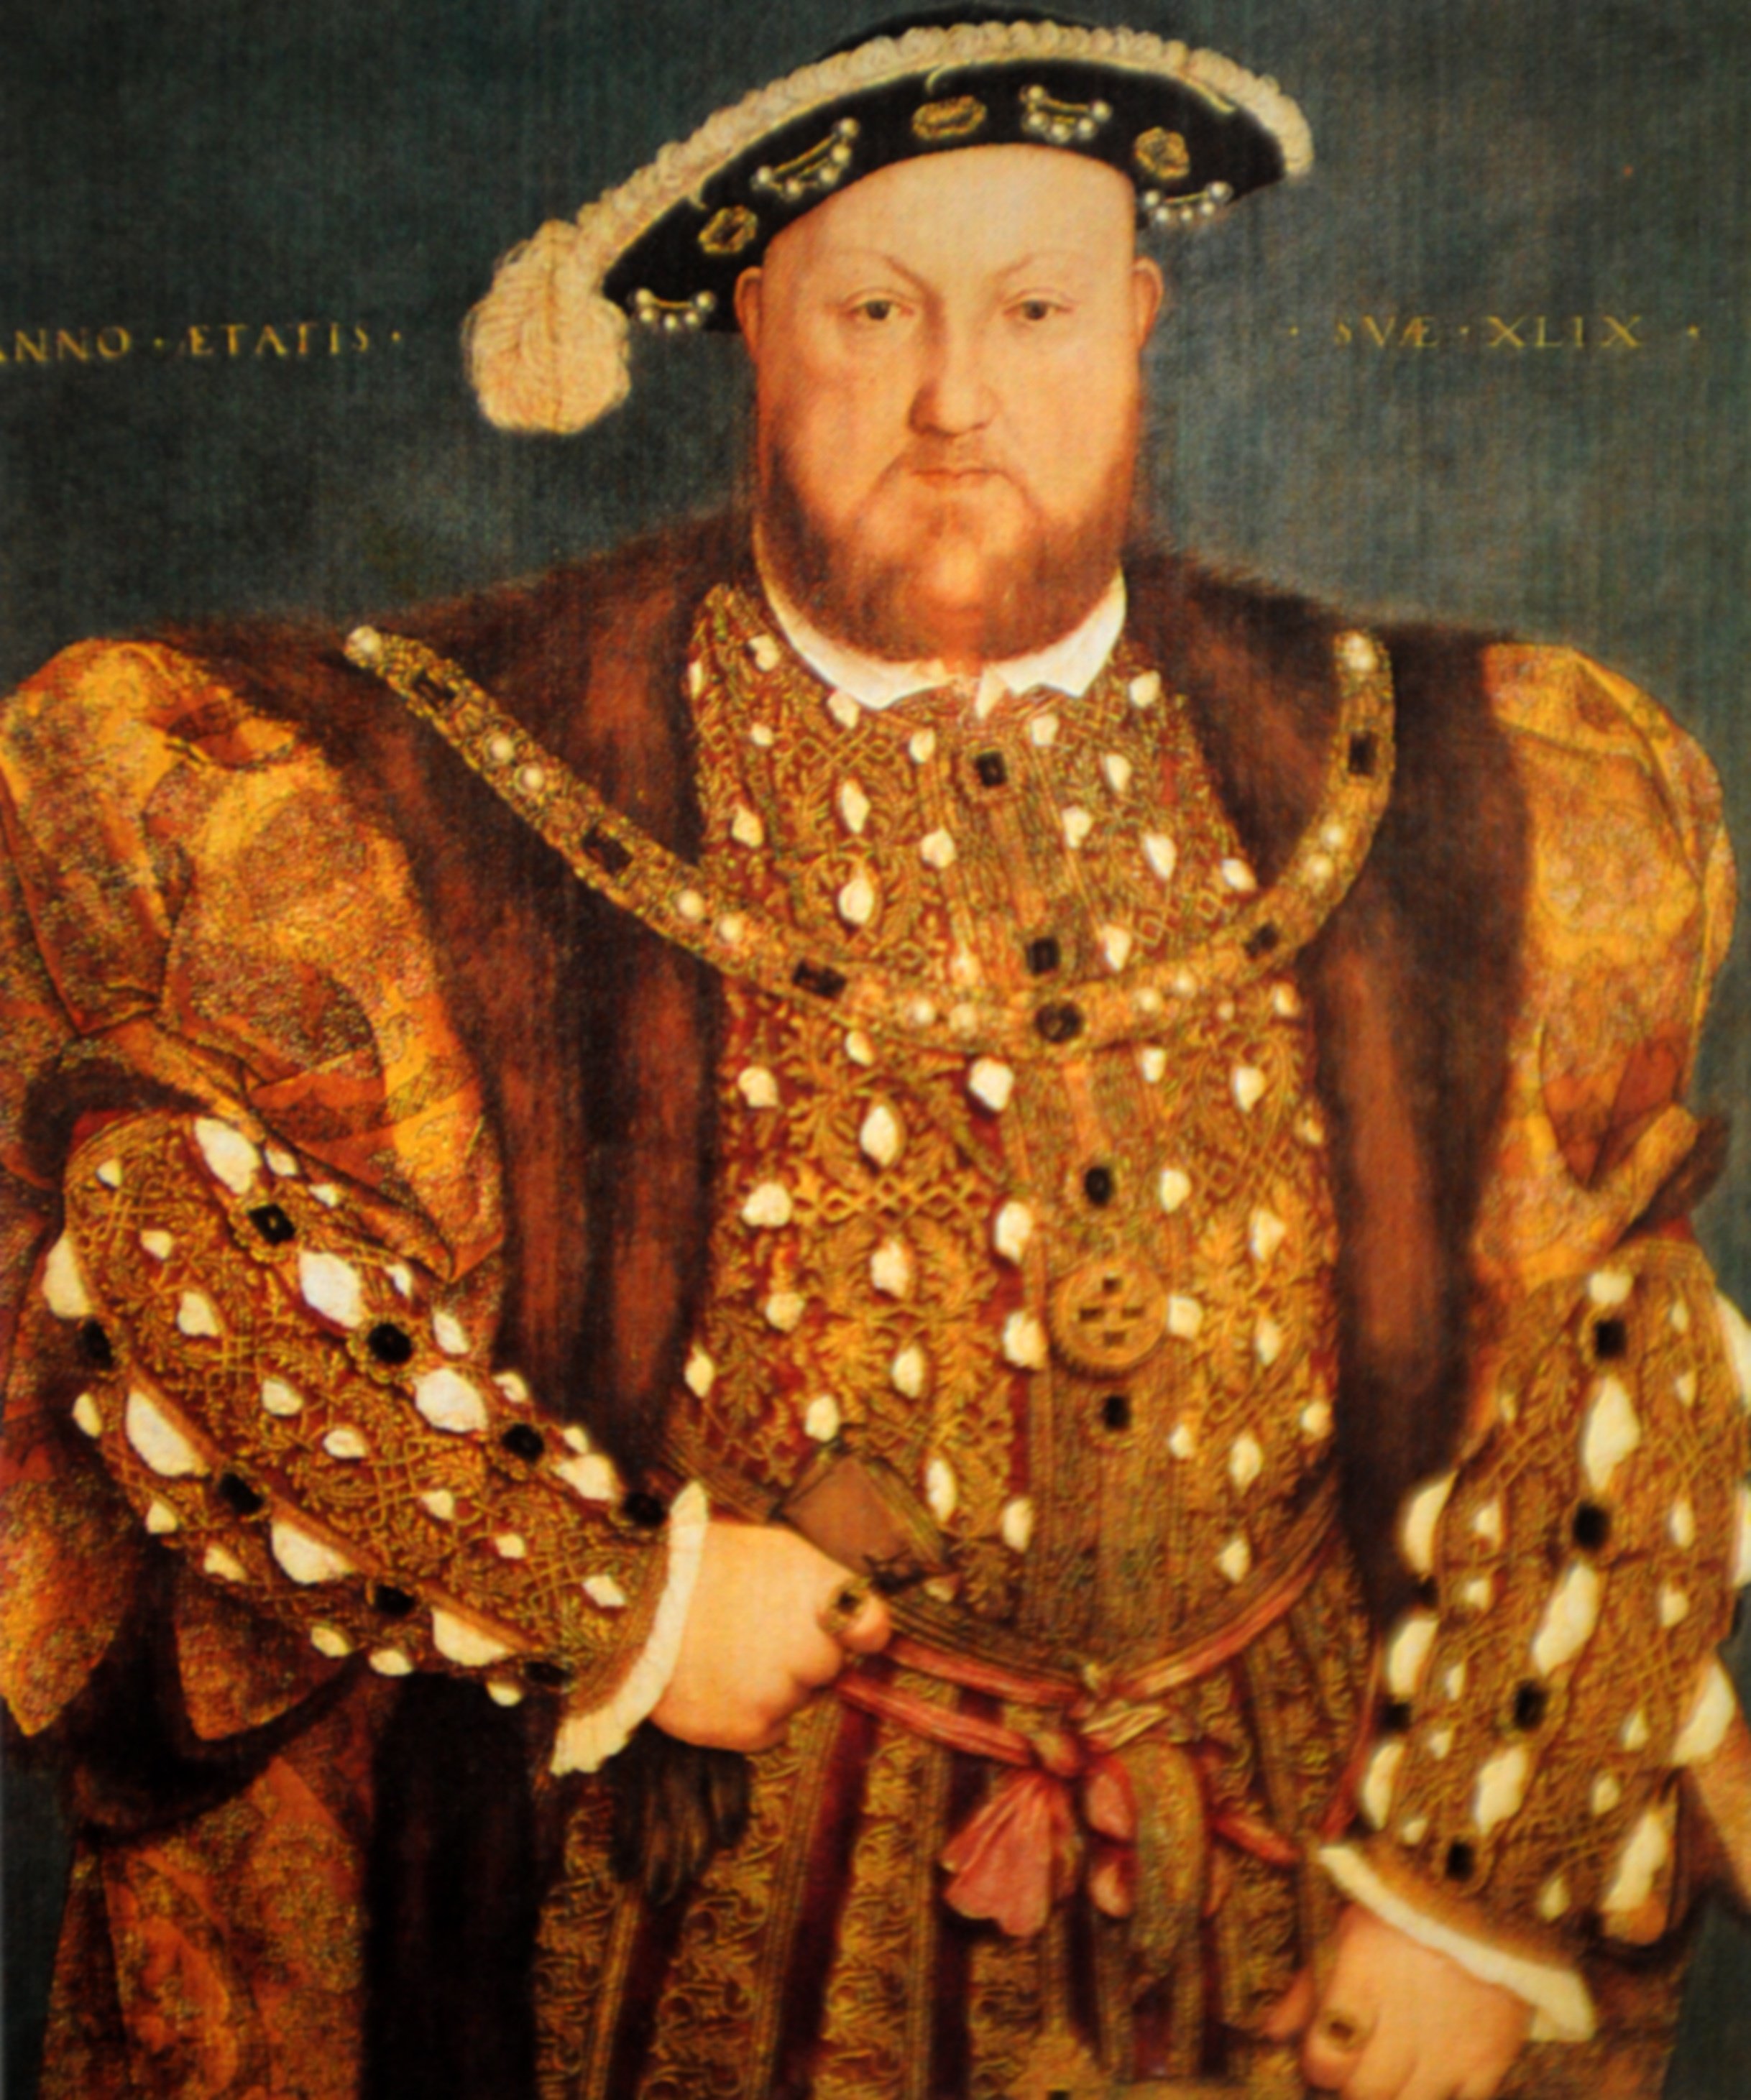 Pictured: Henry VIII, known for his ruthlessness, he was King of England from 1509 until his death in 1547. / Getty Images